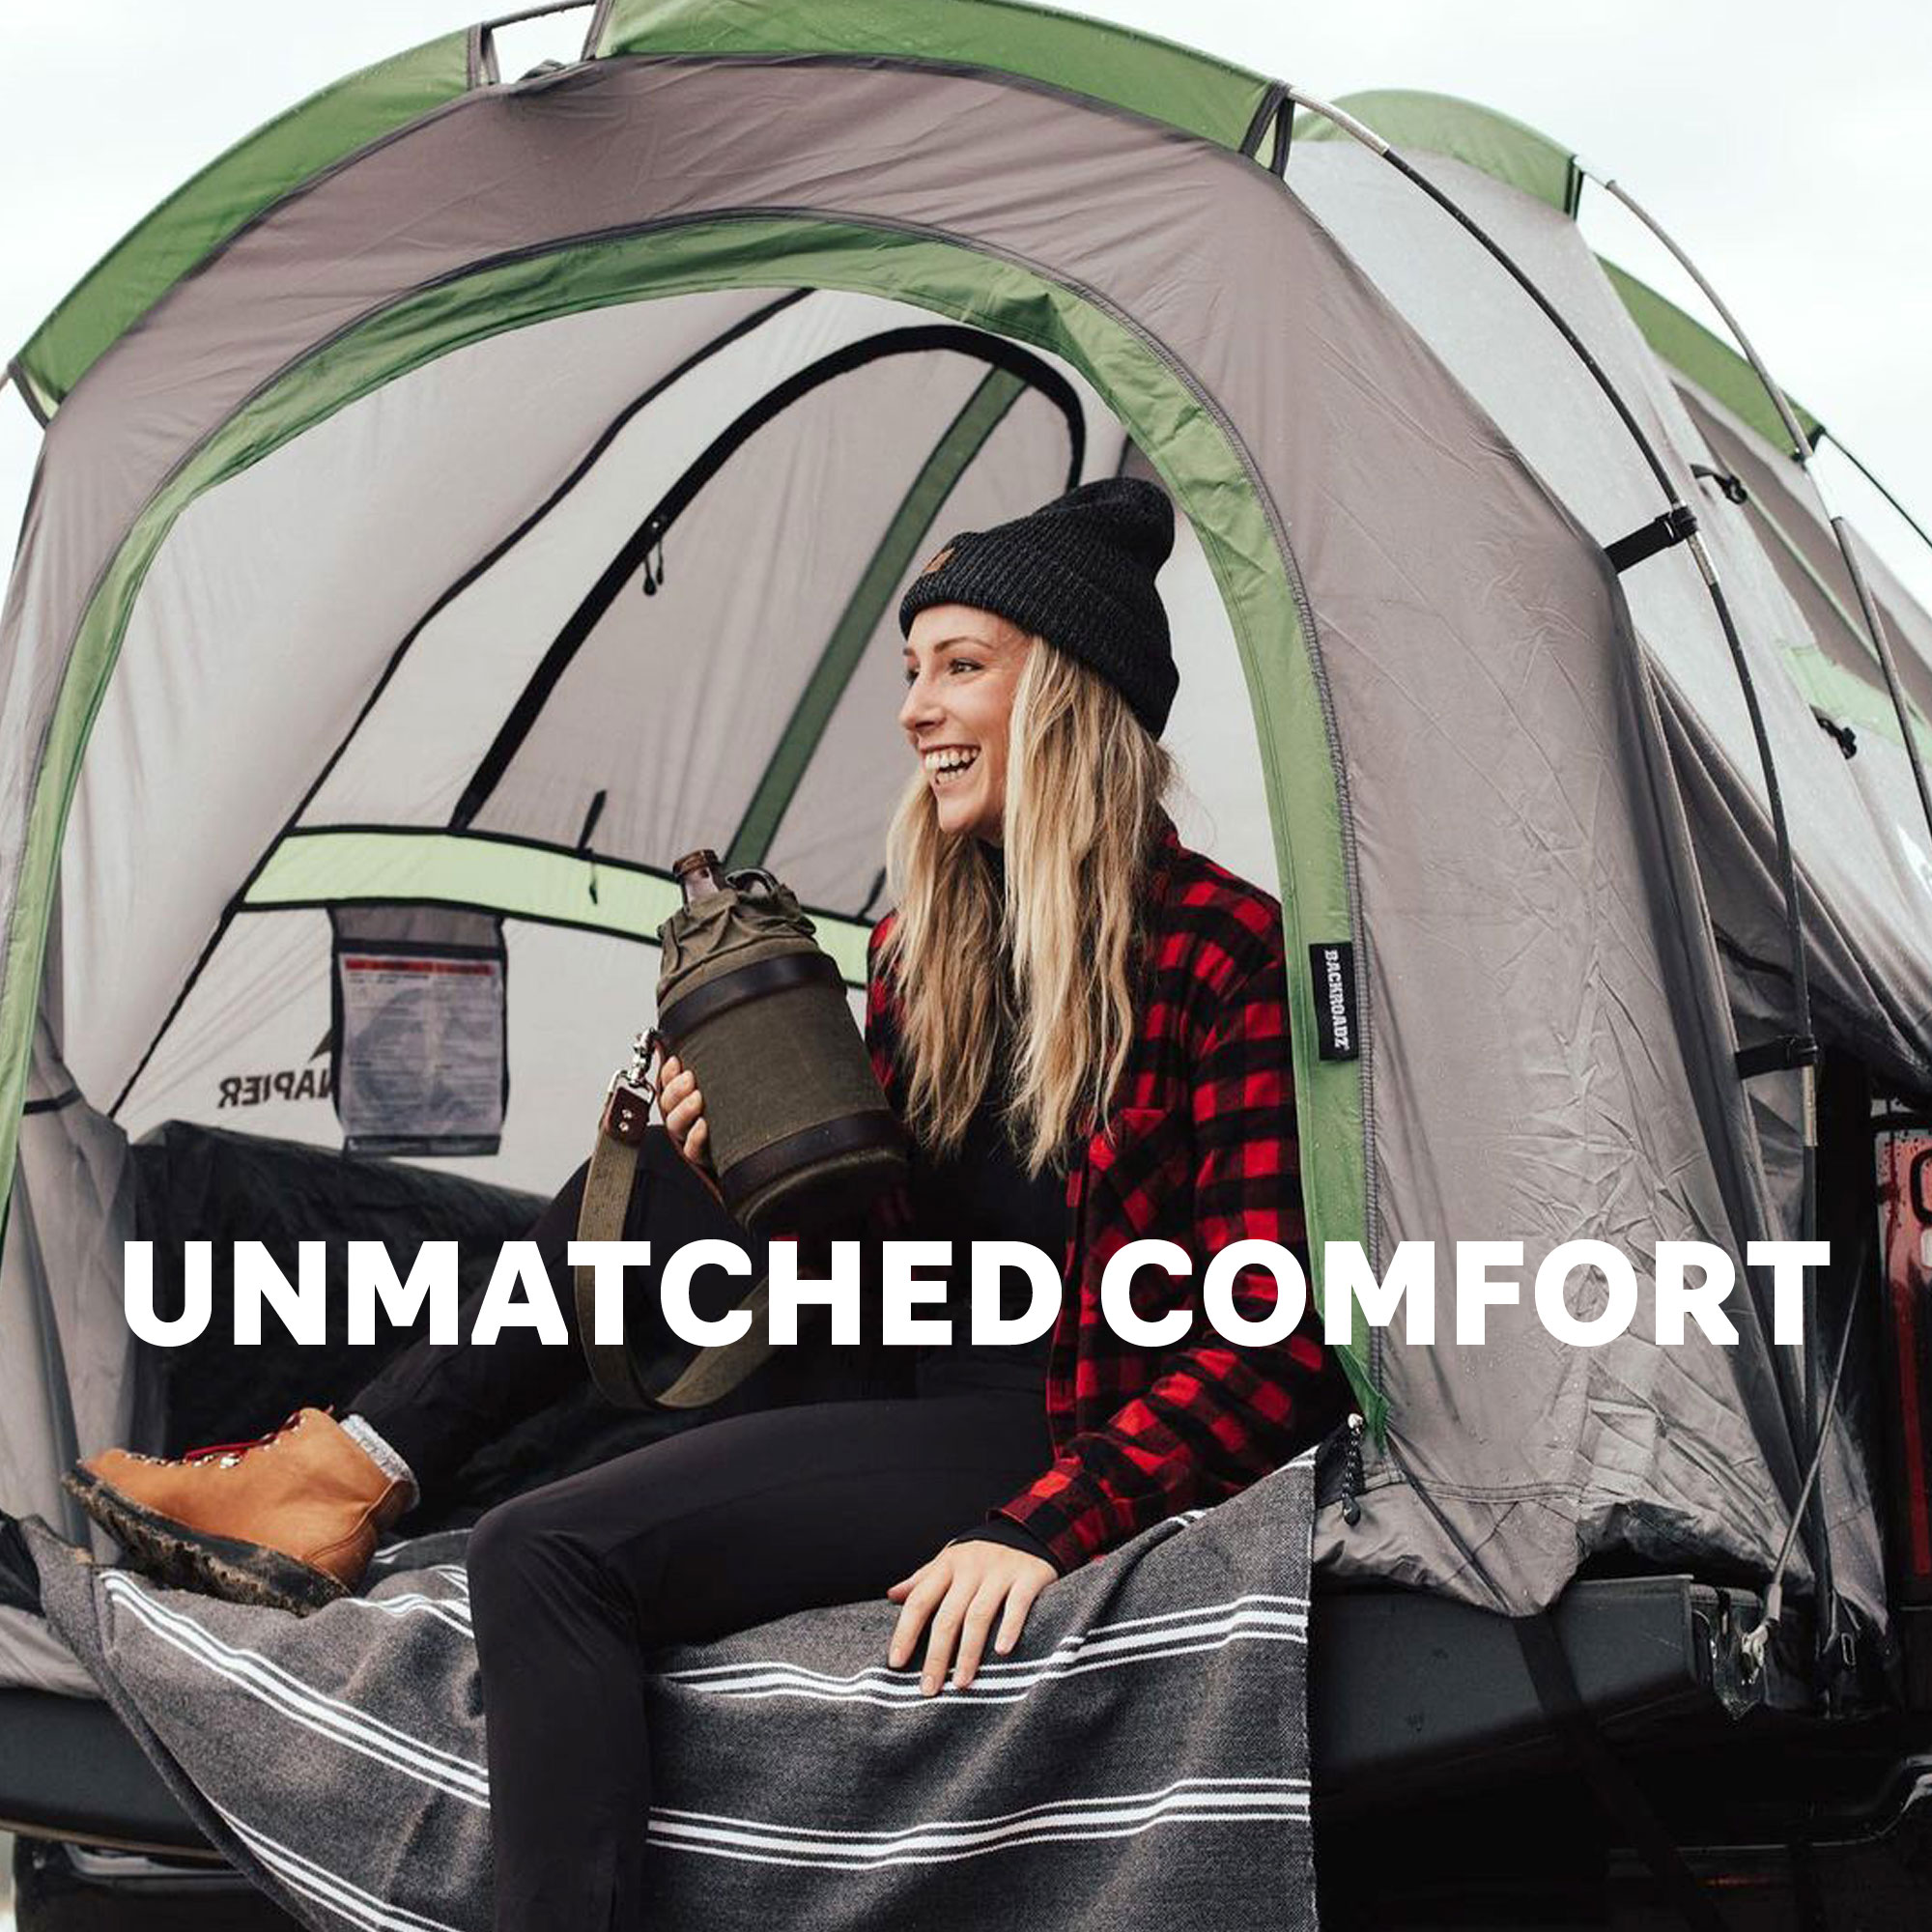 Experience Unmatched Support And Comfort with the Ultimate Posture